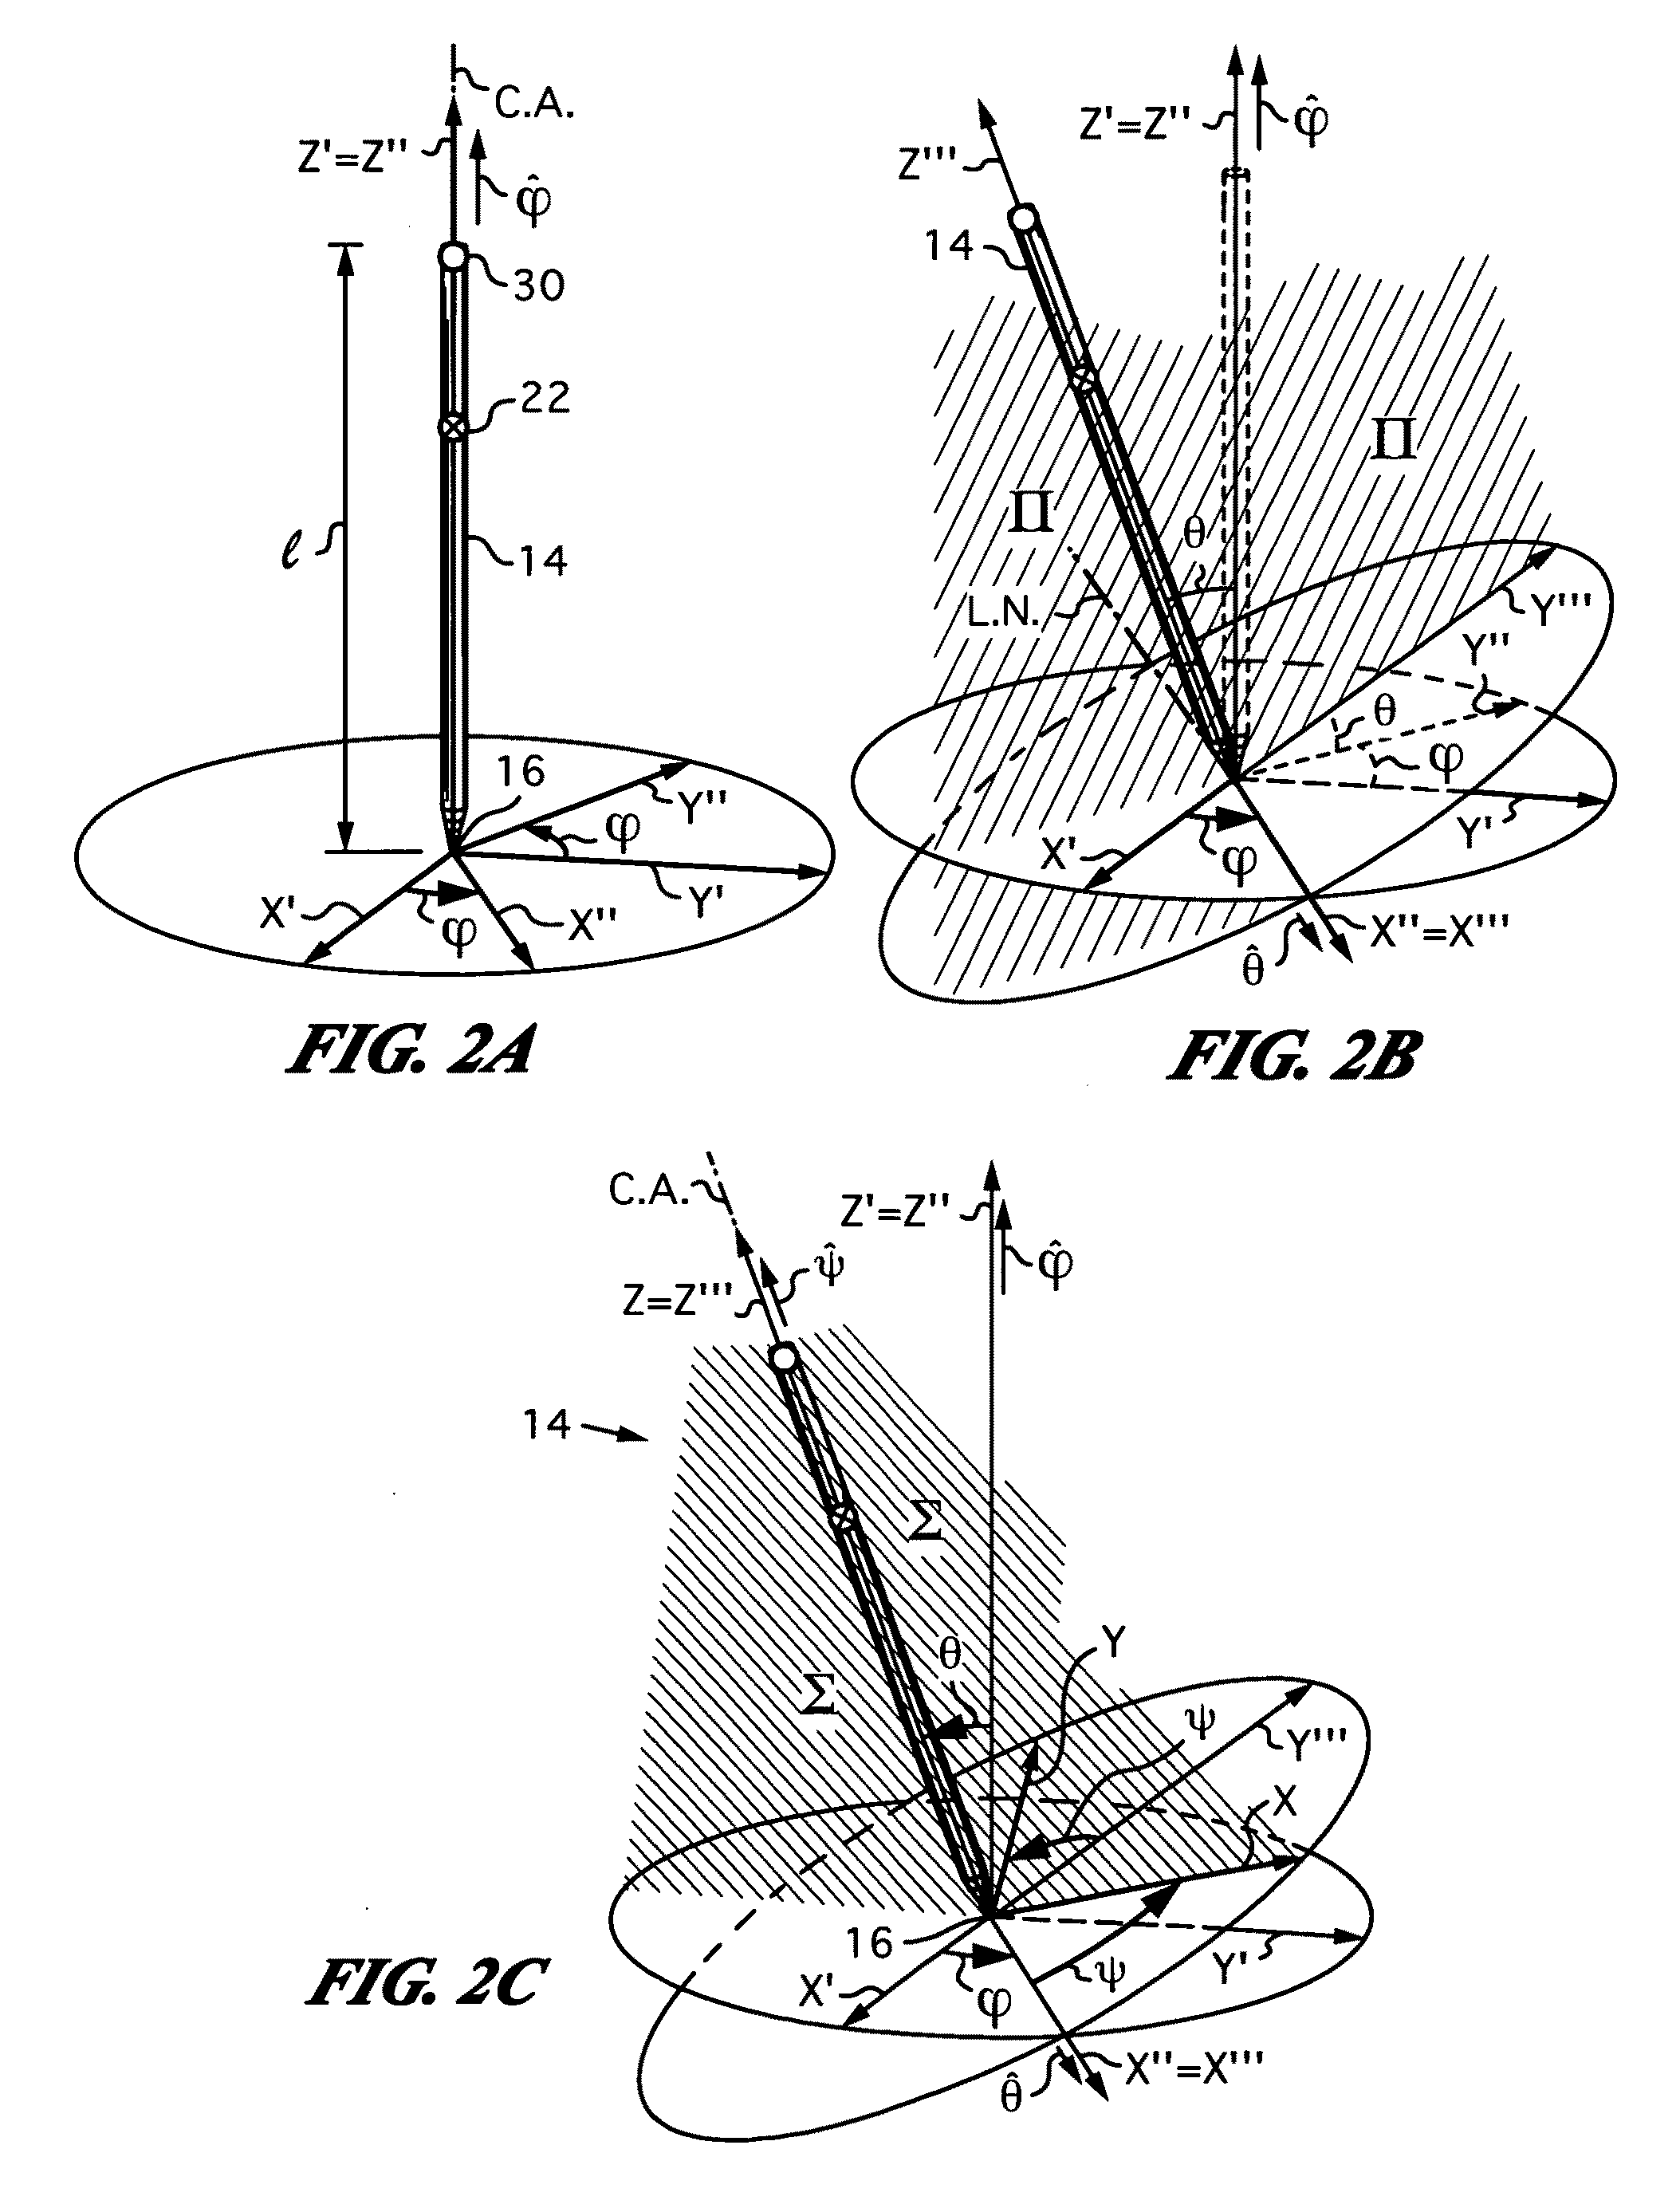 Apparatus and method for determining an absolute pose of a manipulated object in a real three-dimensional environment with invariant features